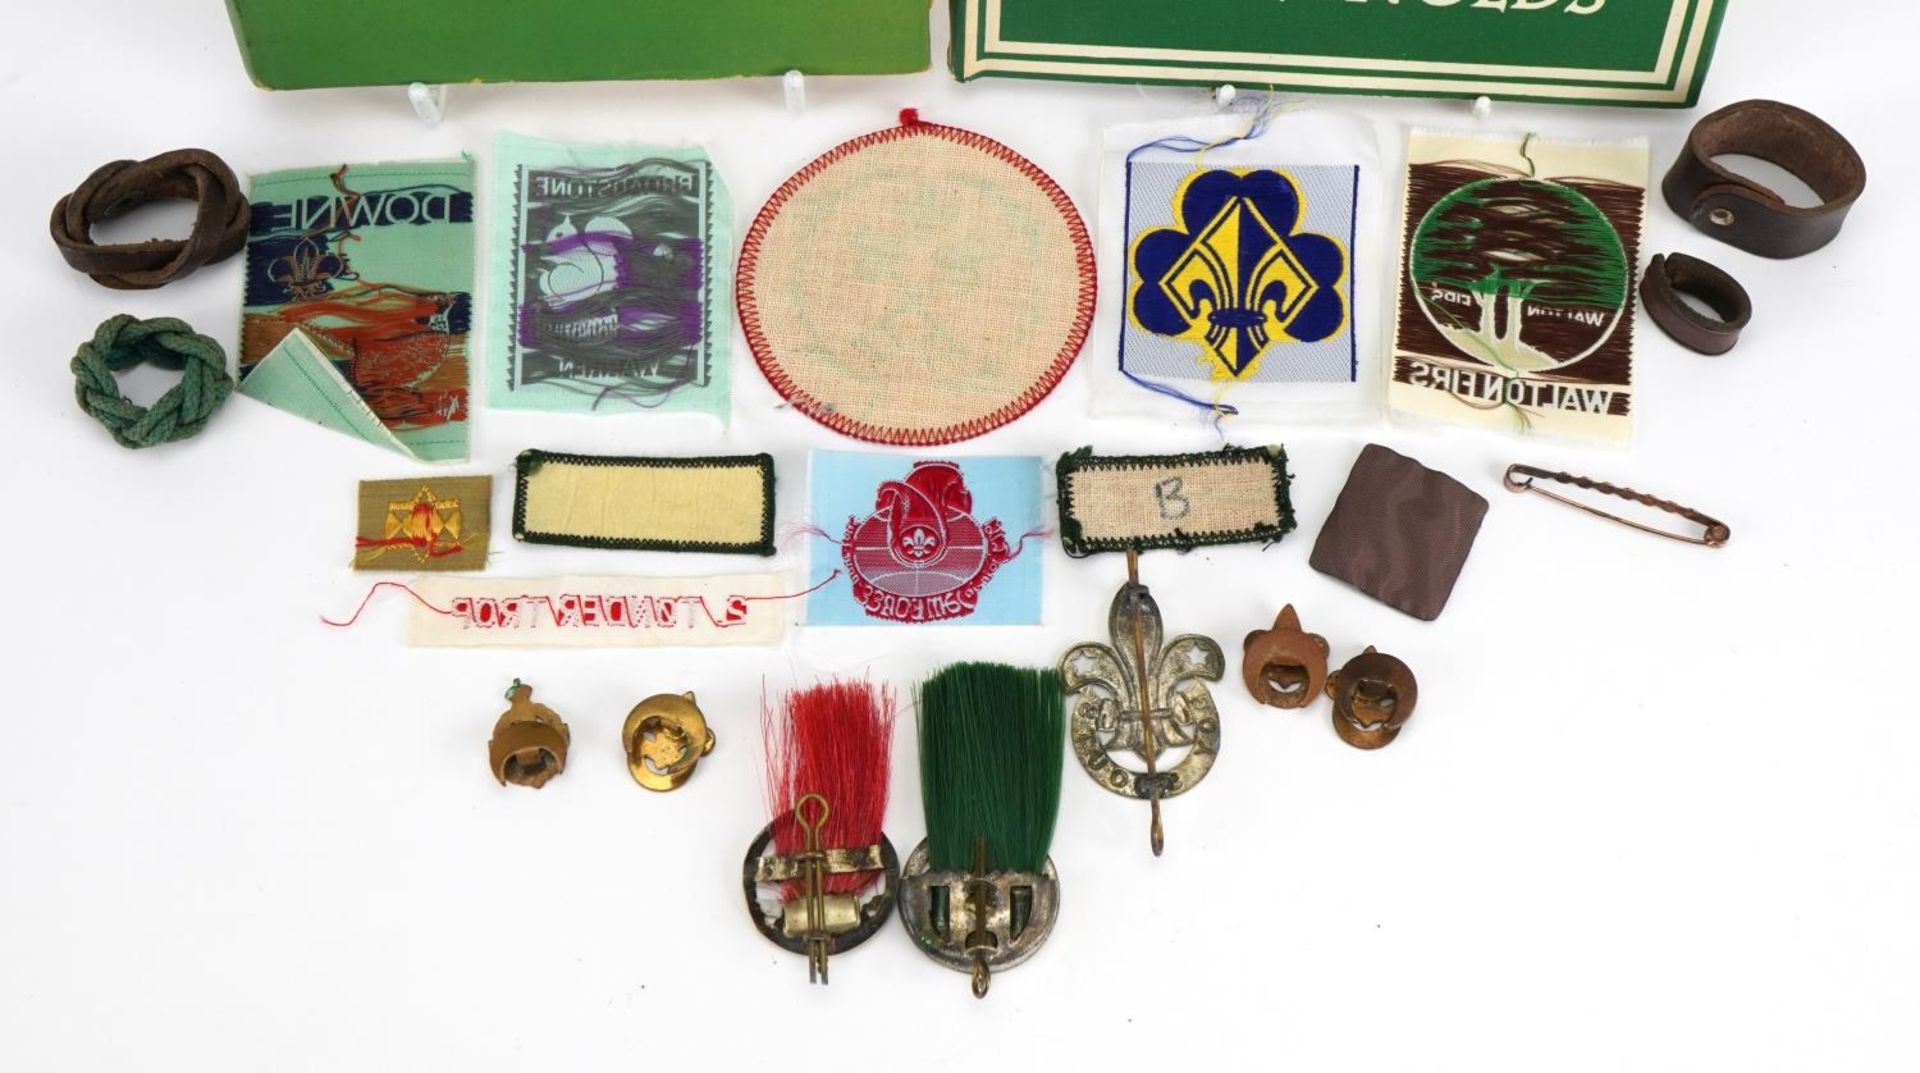 Scouting interest collectables including two hardback books and badges For further information on - Image 5 of 9